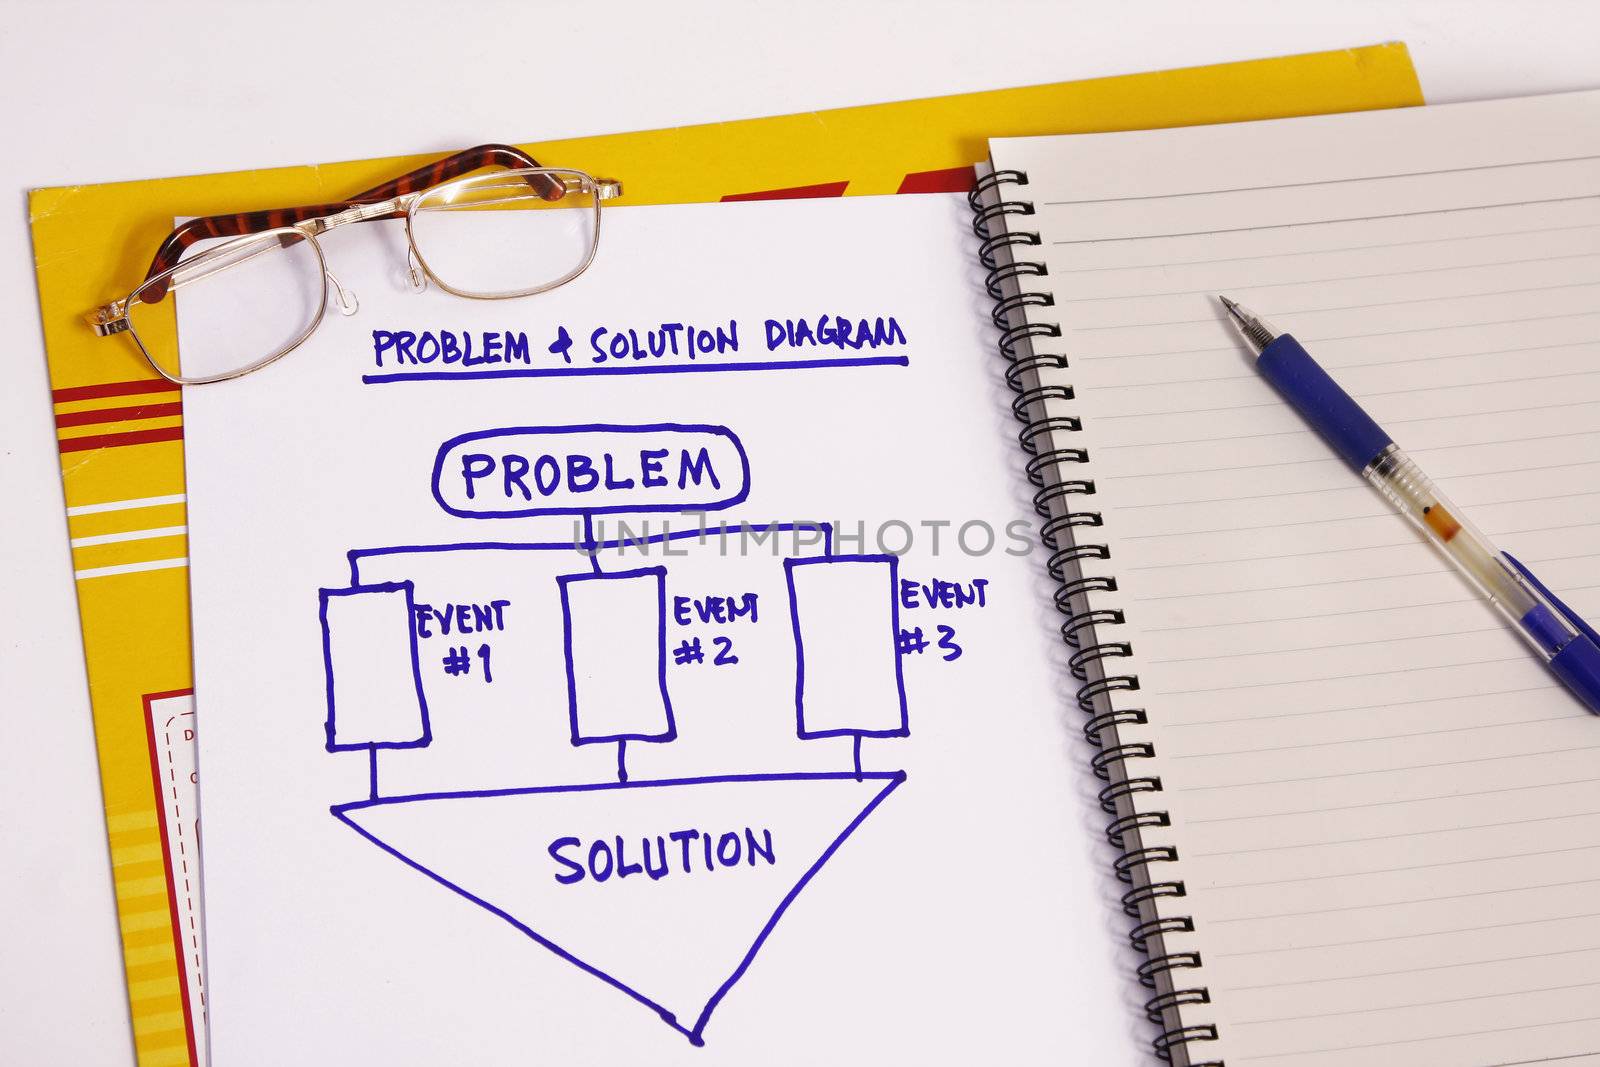 Solutions to a problem concept - many uses in workshops,seminars and training.